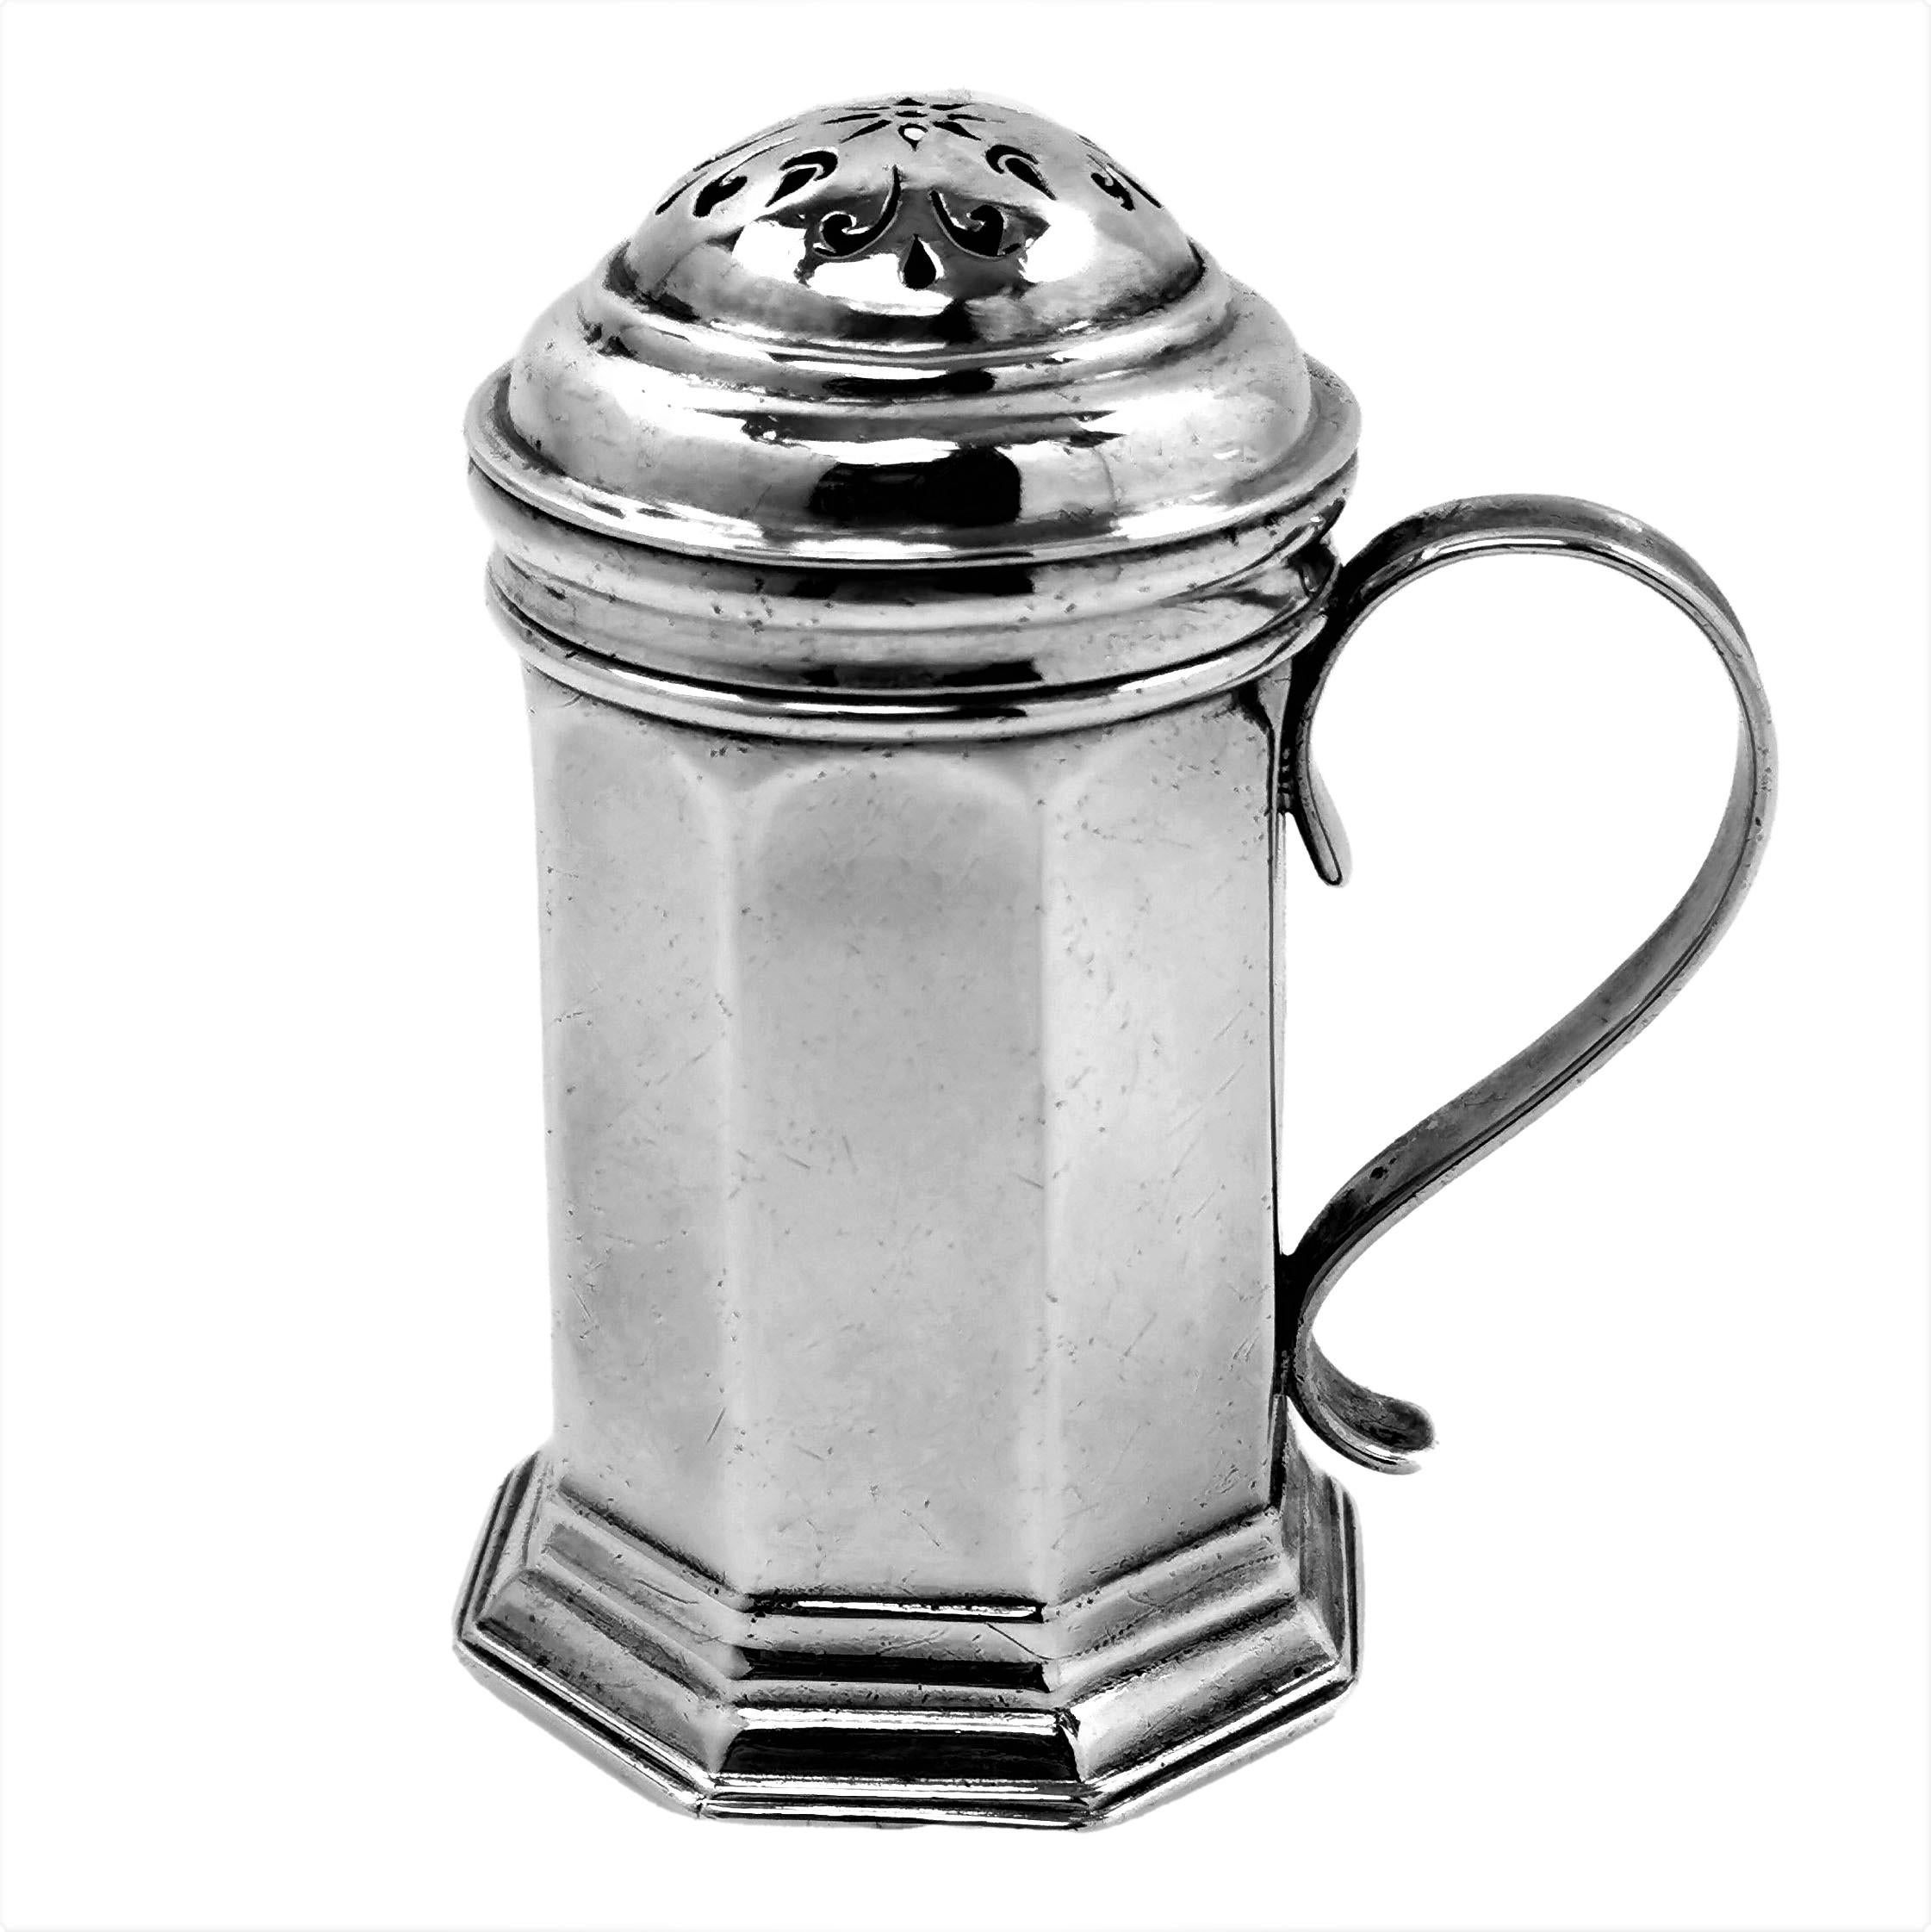 A small Antique early Georgian solid Silver Shaker /  Caster with an octagonal body and a domed push fit lid.

Made in England in 1722 by James Goodwin.

Approx. Weight - 82g
Approx. Height - 7.5cm
Approx. Width of base - 4.3cm

The George I shaker